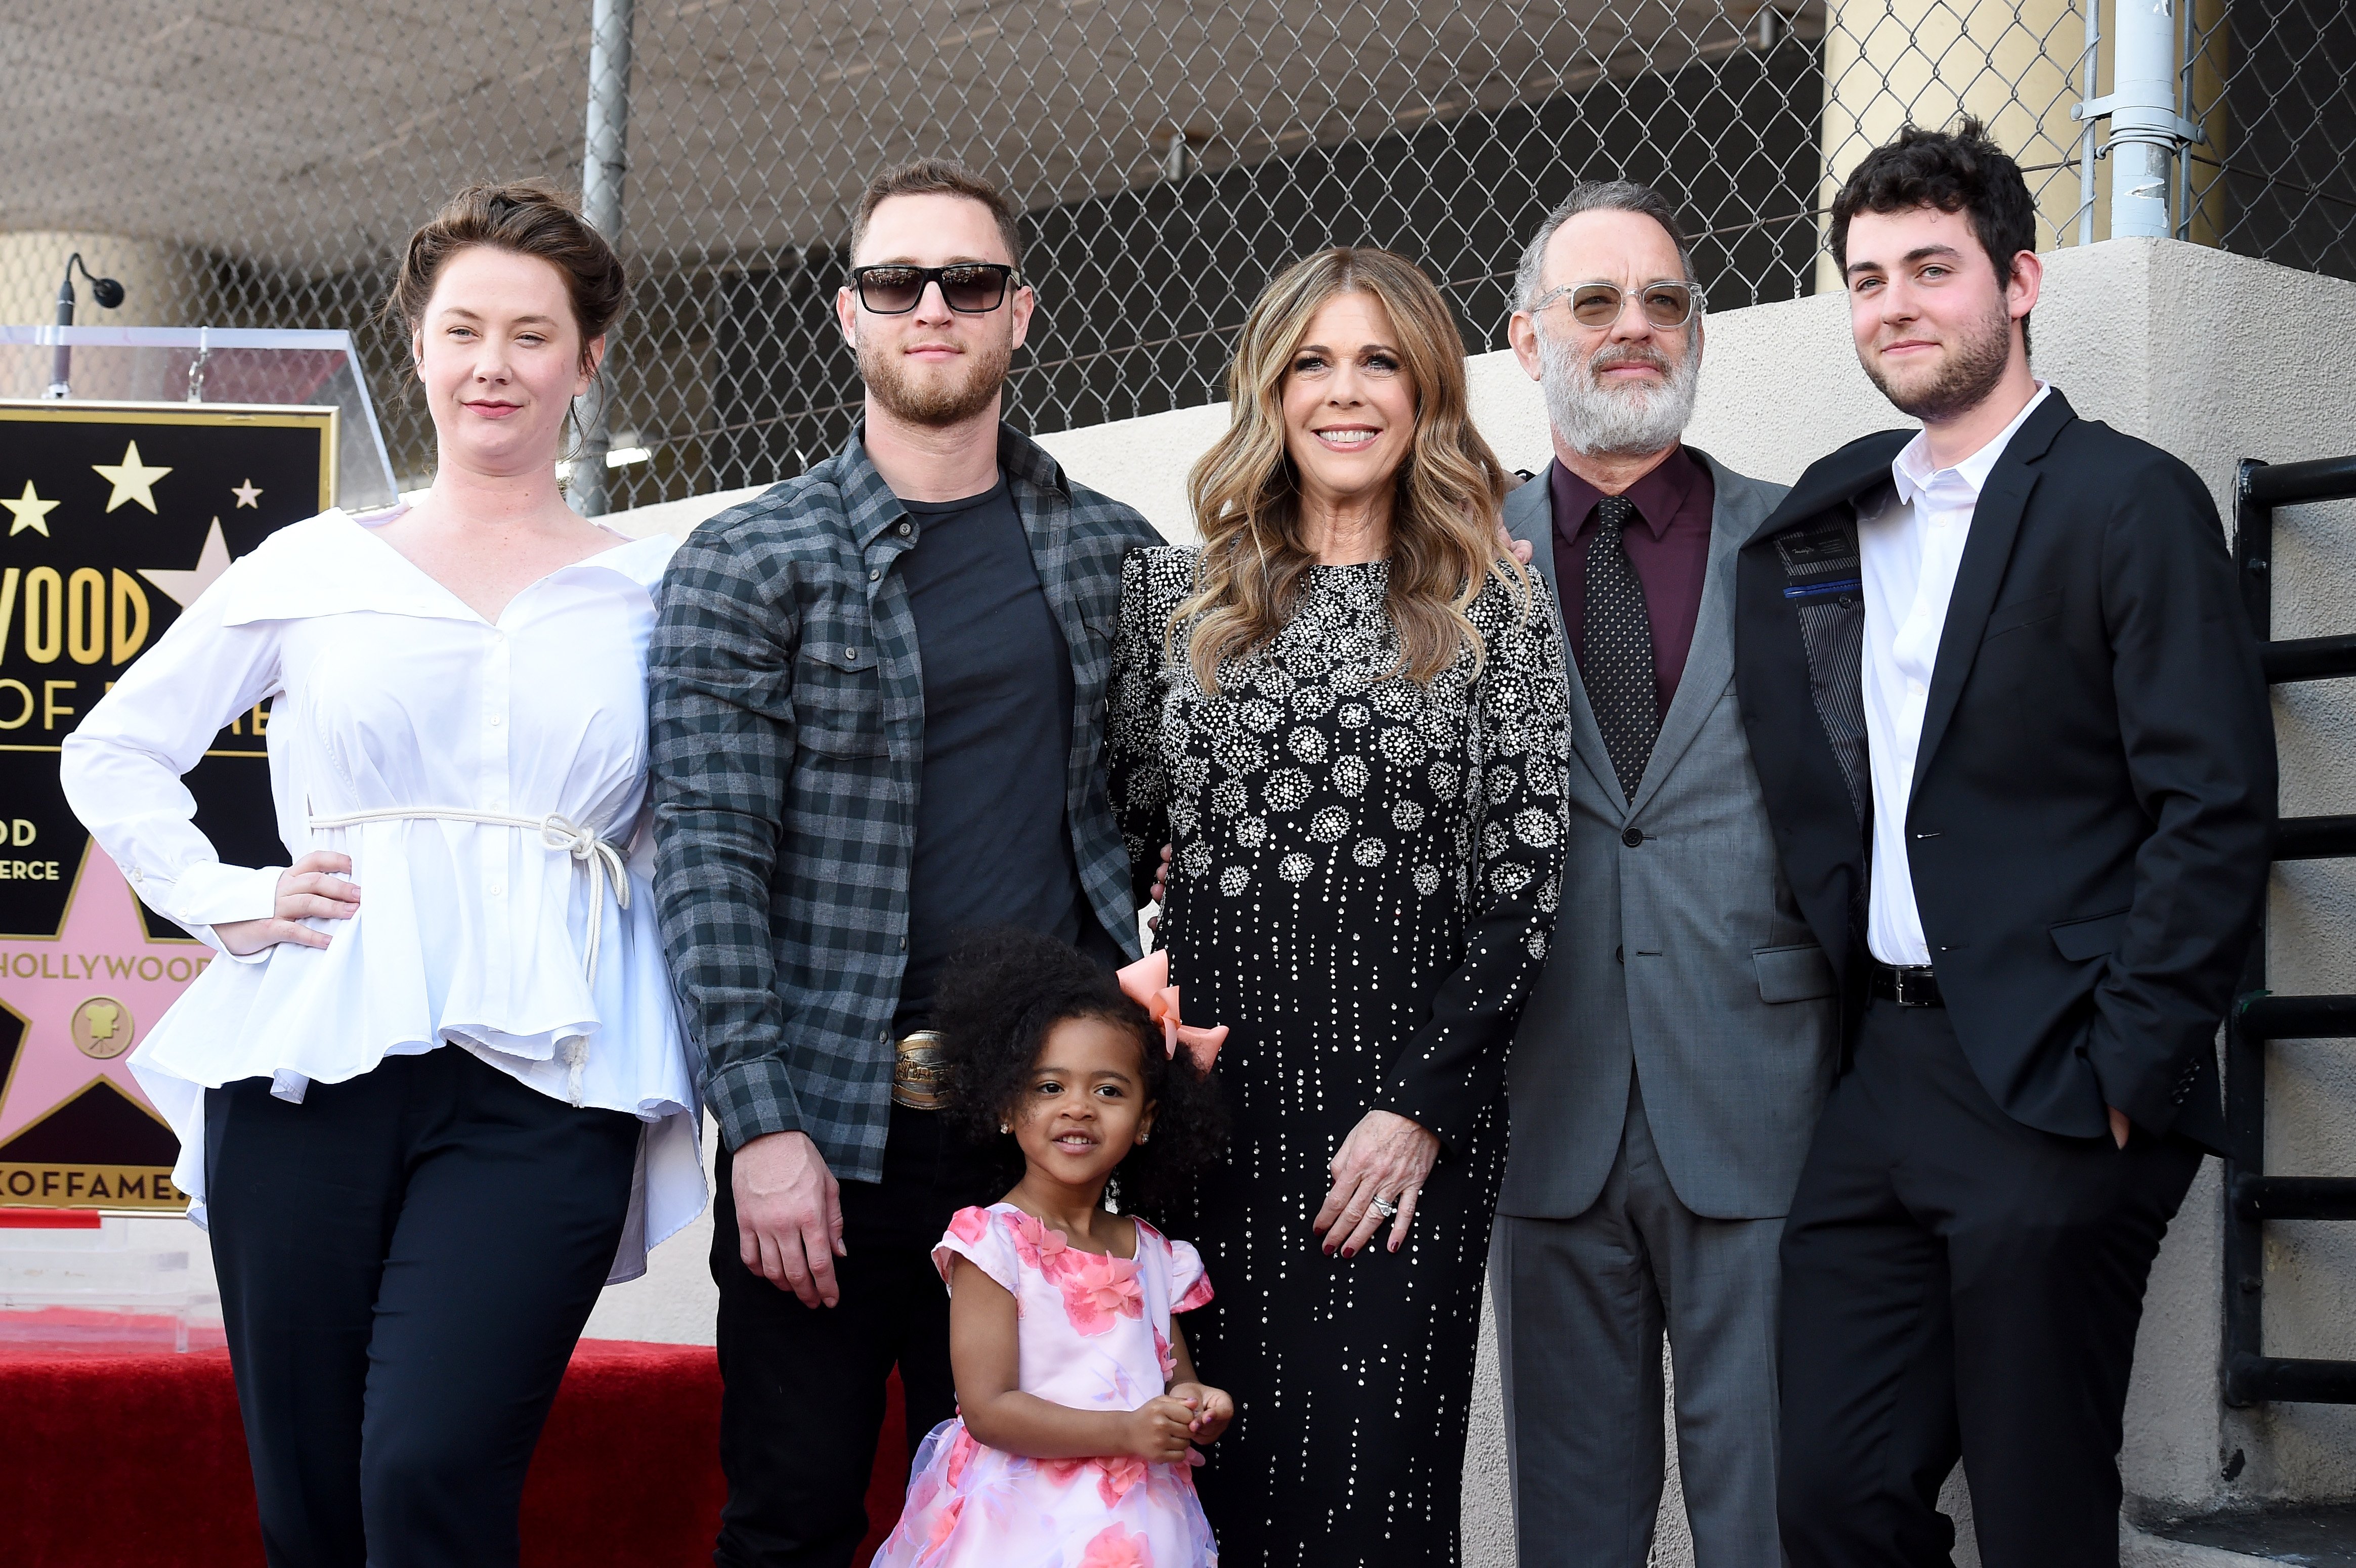 Chet Hanks, Rita Wilson, Tom Hanks, and Truman Hanks at the ceremony honoring Rita Wilson with Star on the Hollywood Walk of Fame on March 29, 2019, in Hollywood | Photo: Getty Images